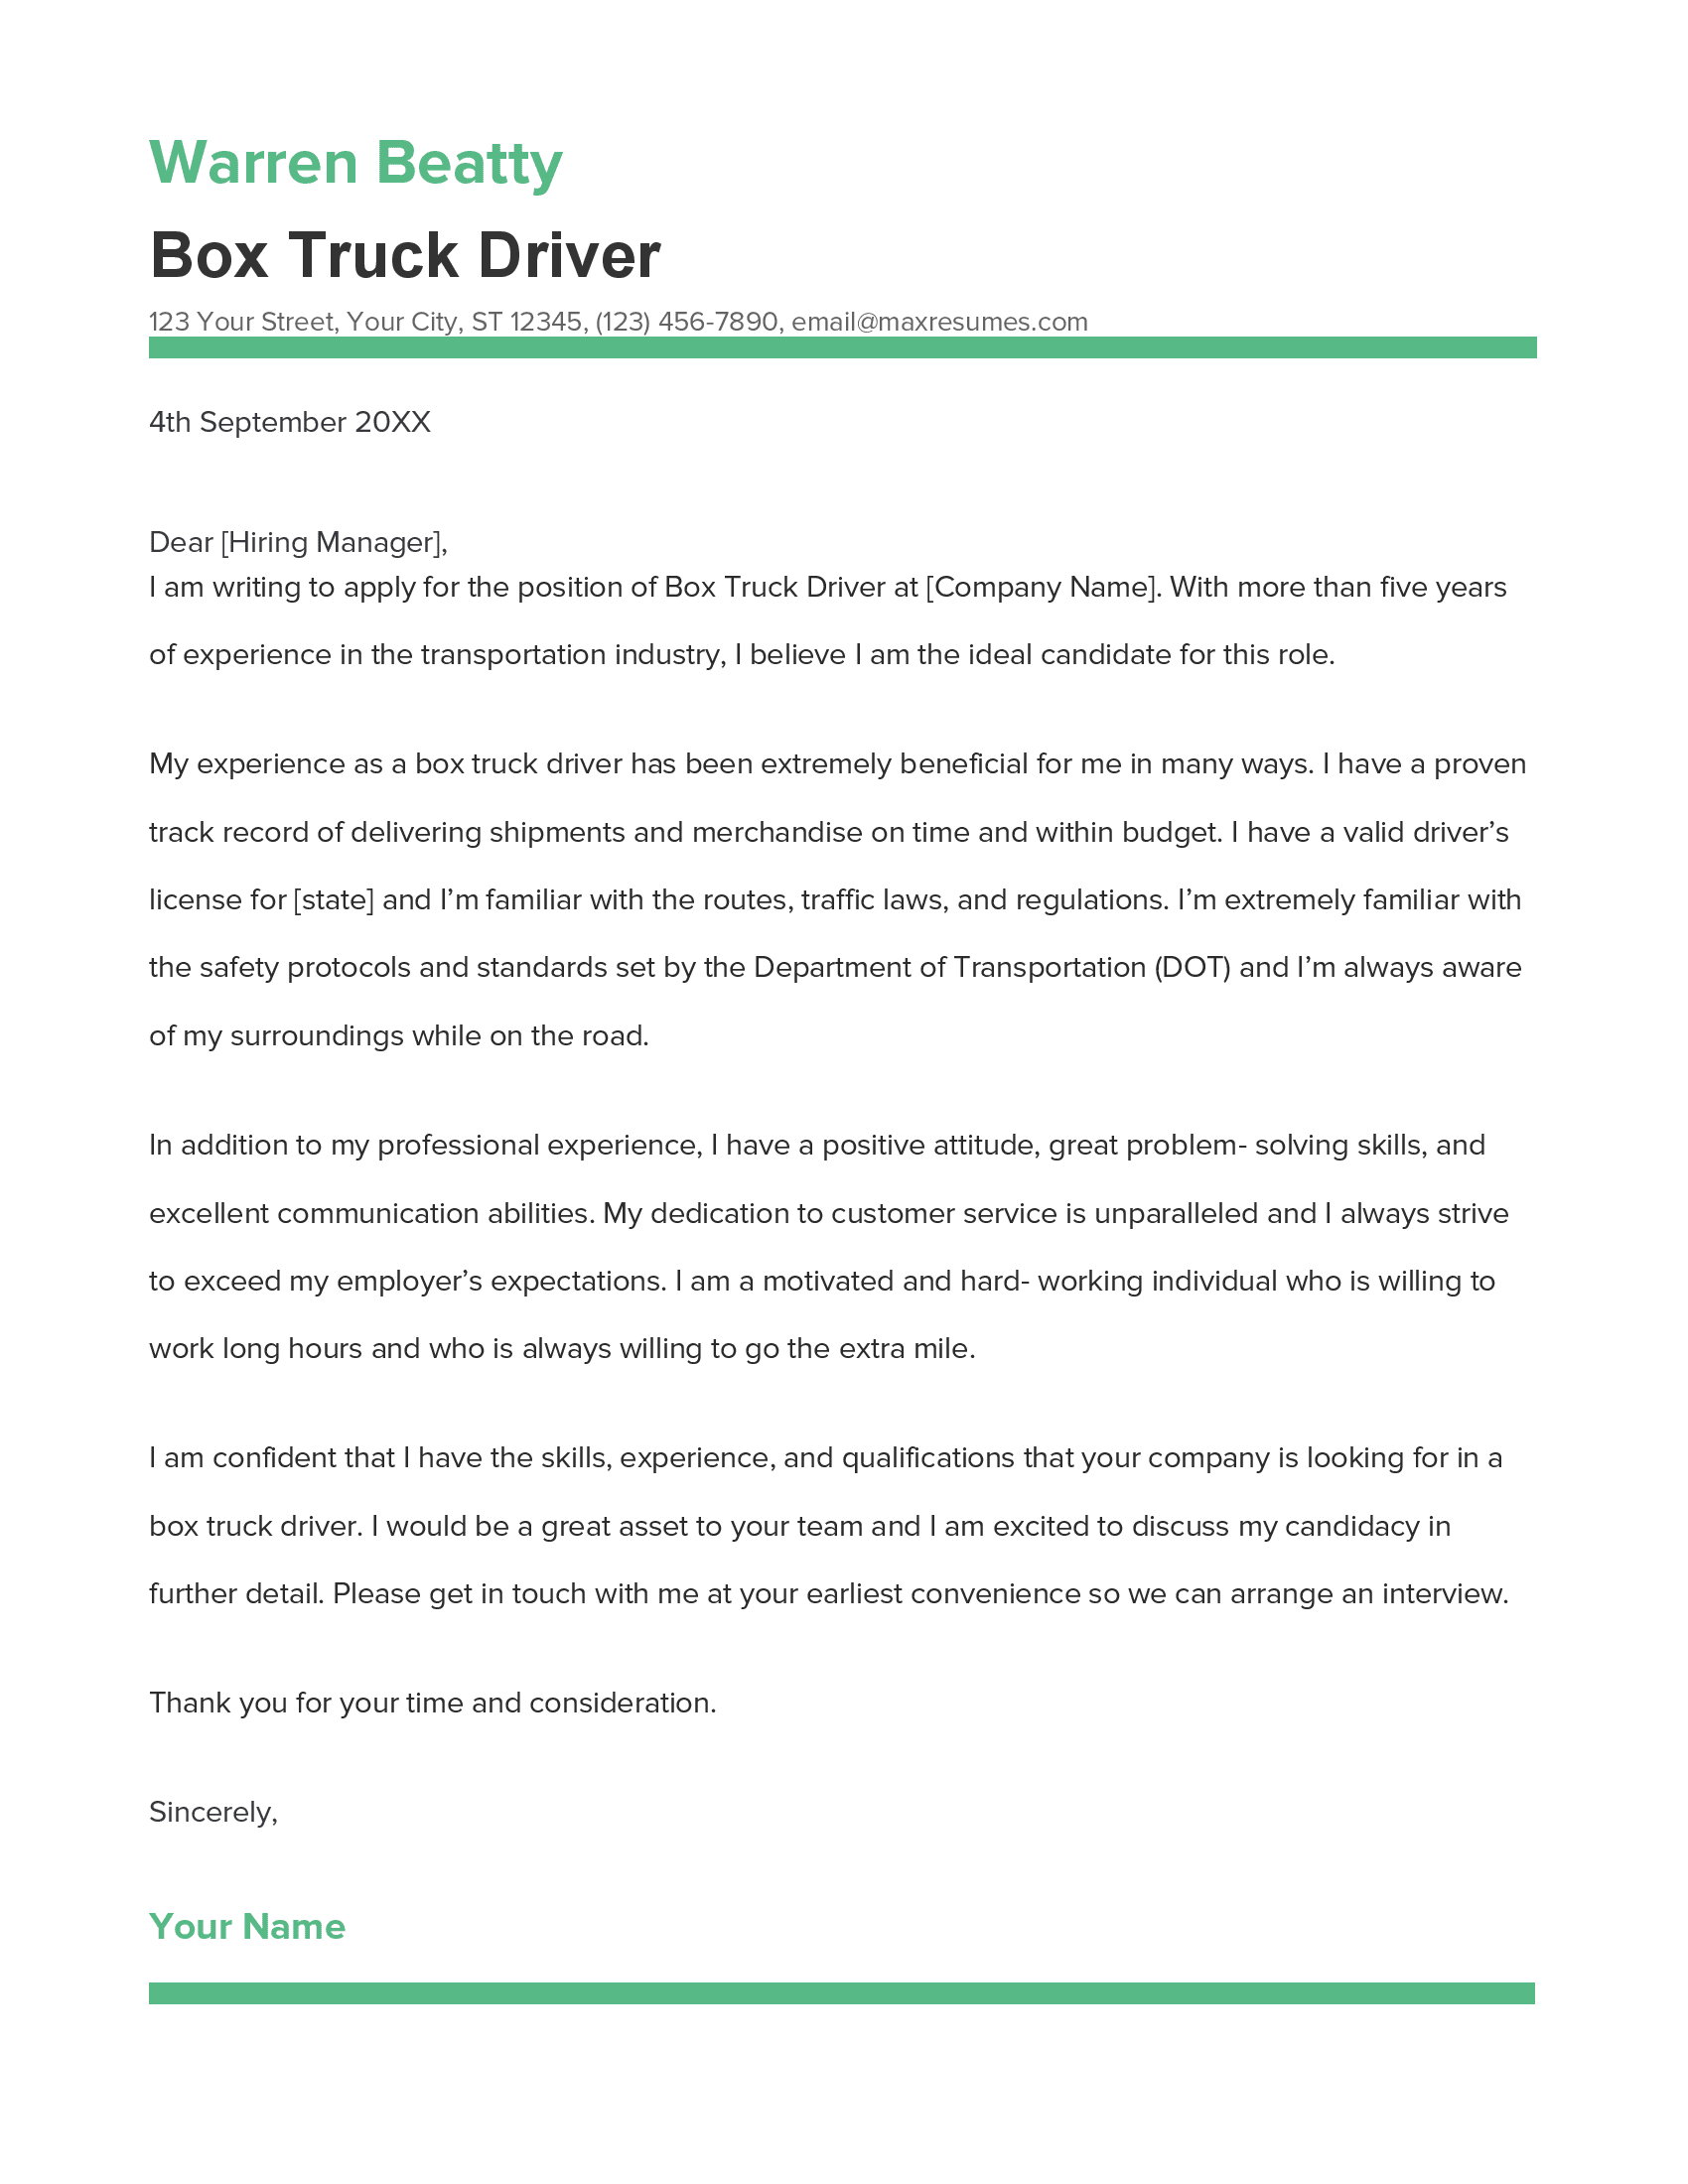 Box Truck Driver Cover Letter Example